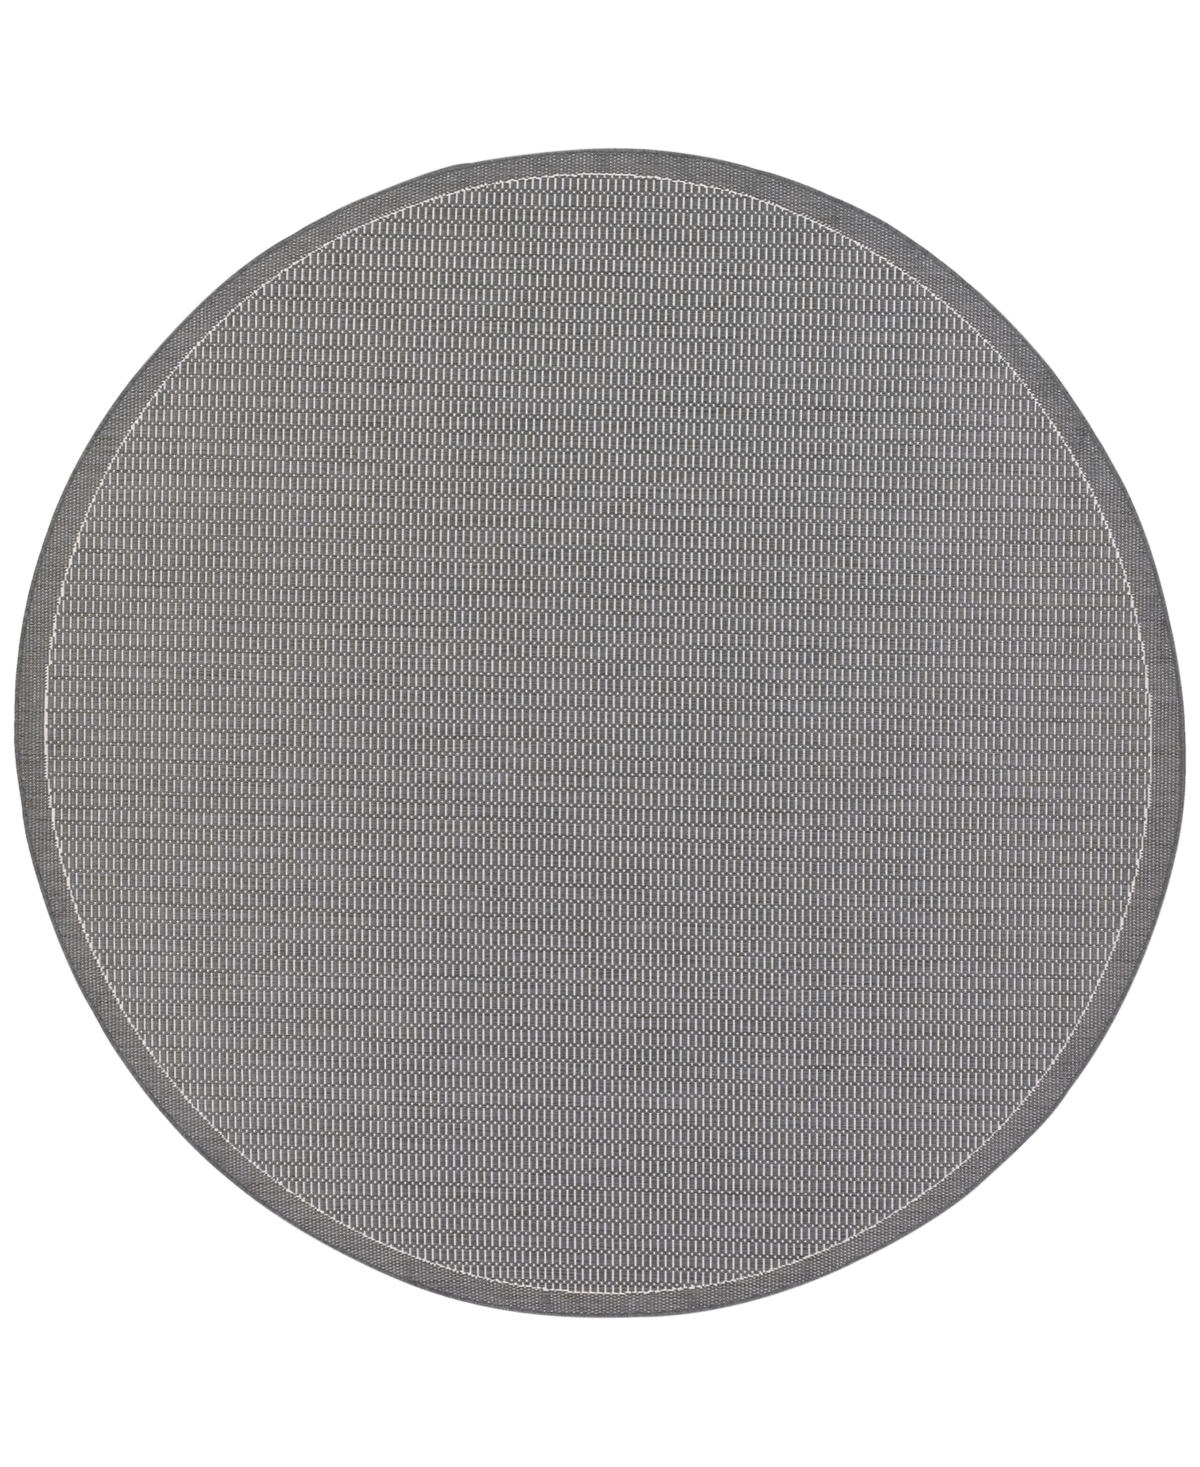 Couristan Closeout!  Recife Saddle Stitch Machine-washable 7'6" Round Indoor/outdoor Area Rug In Grey-white